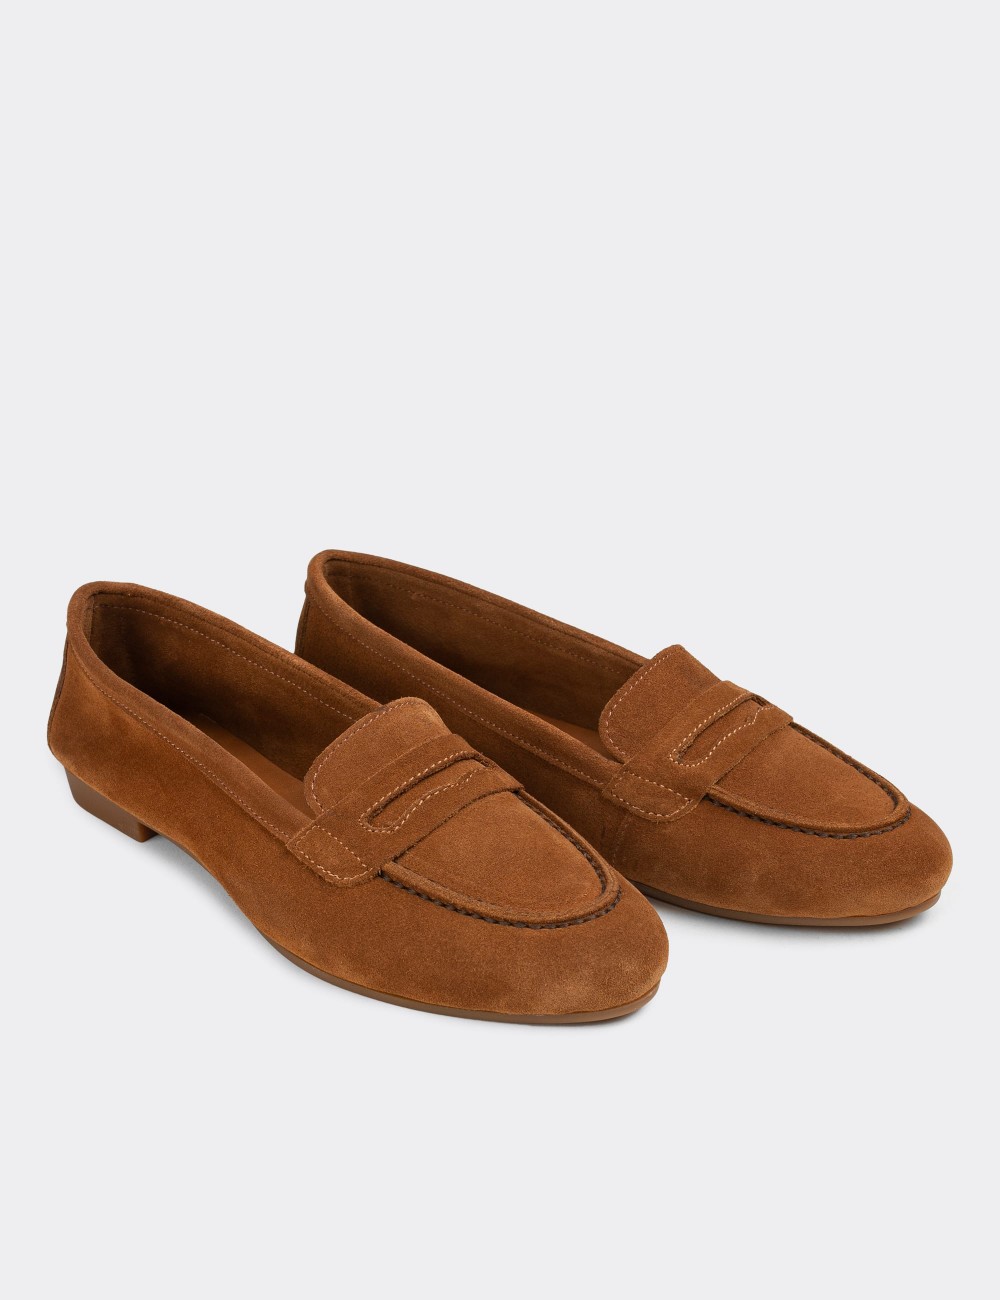 Tan Suede Leather Loafers - E3201ZTBAC03